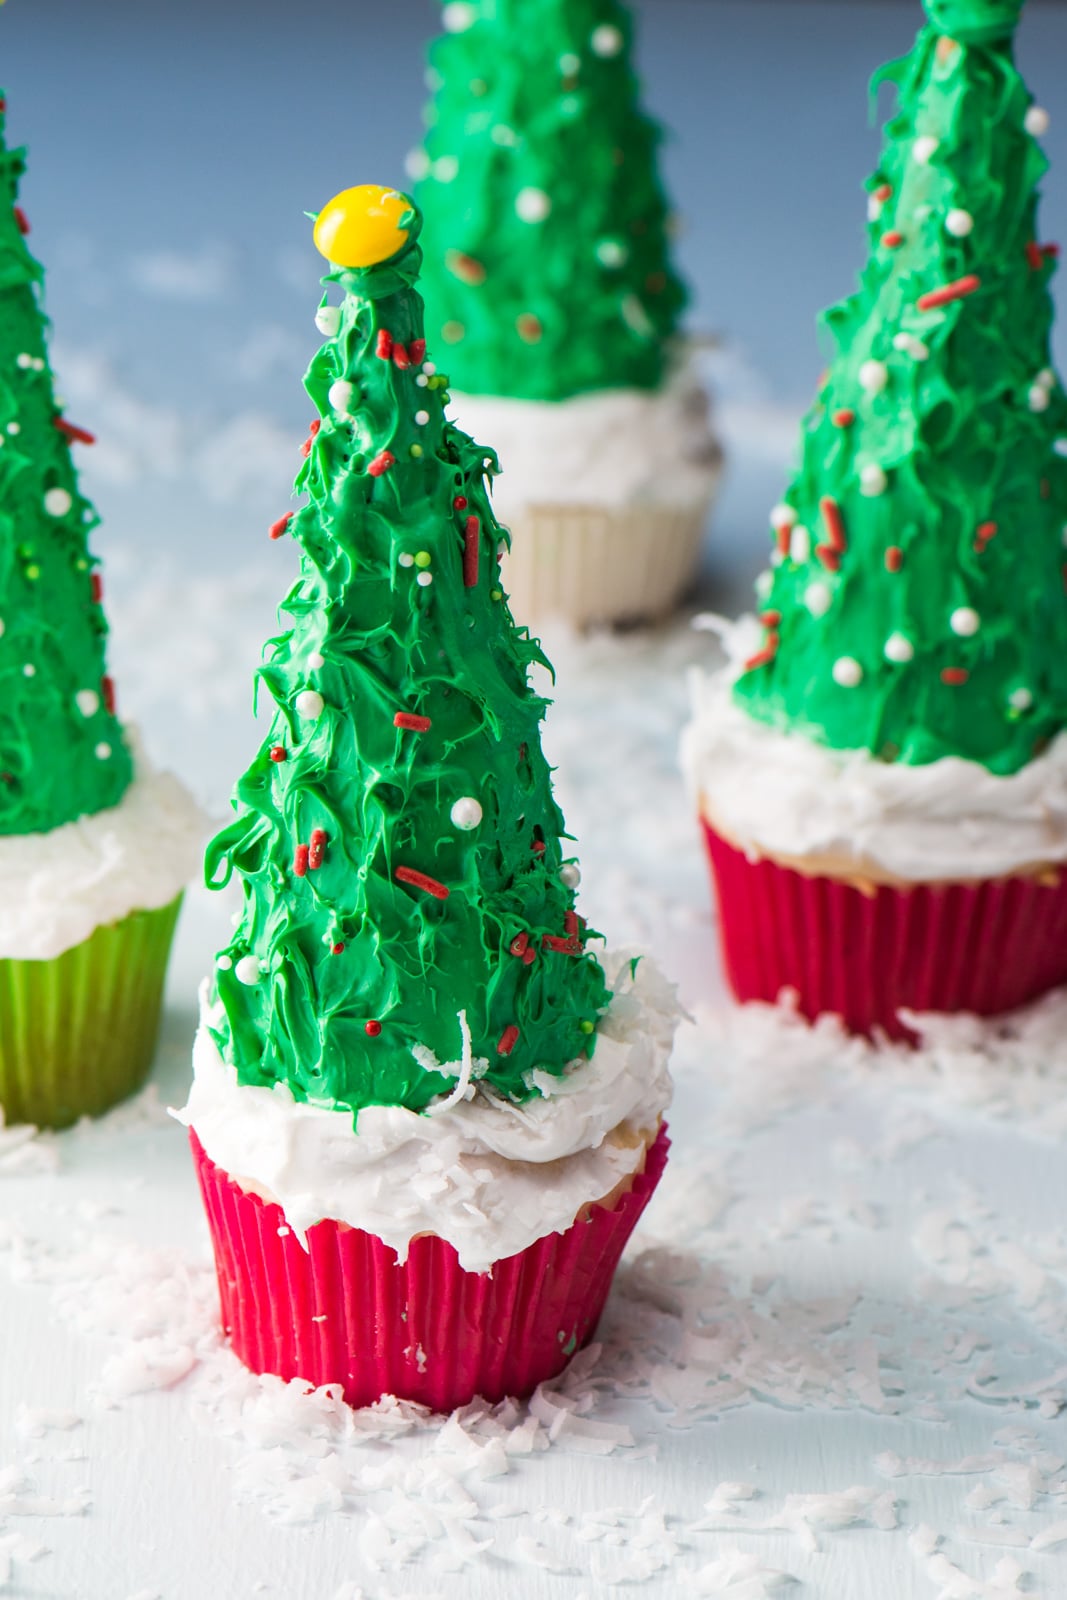 Vegan Christmas Tree Cupcakes for your holiday baking enjoyment and your festive party platters!